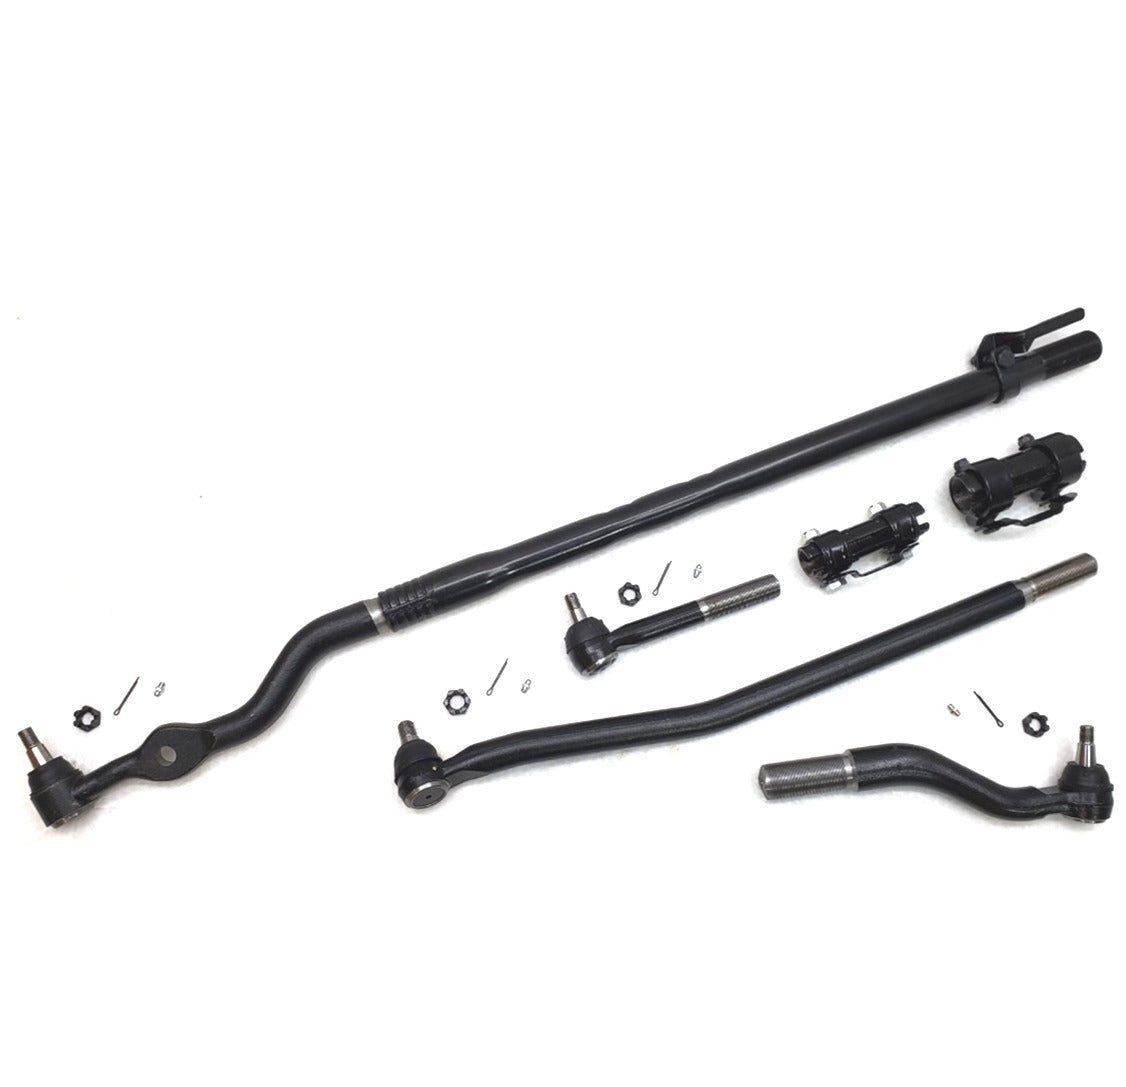 HD Drag Link Tie Rod Sleeve Steering Kit for 1999-2004 Ford F250, F350, Excursion 4x4